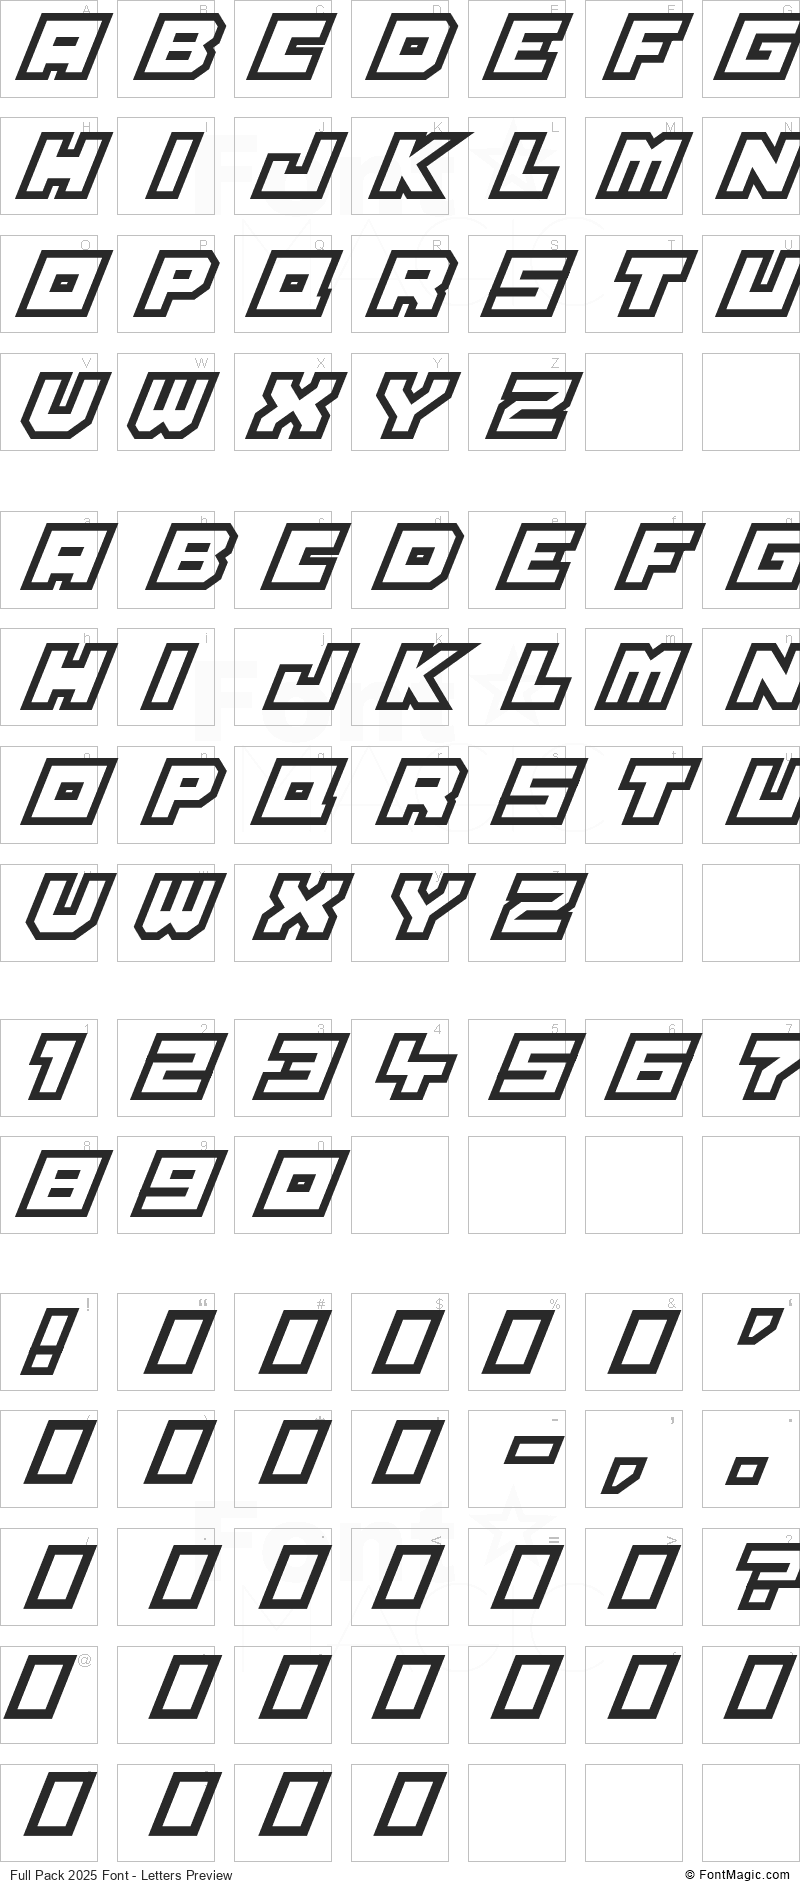 Full Pack 2025 Font - All Latters Preview Chart